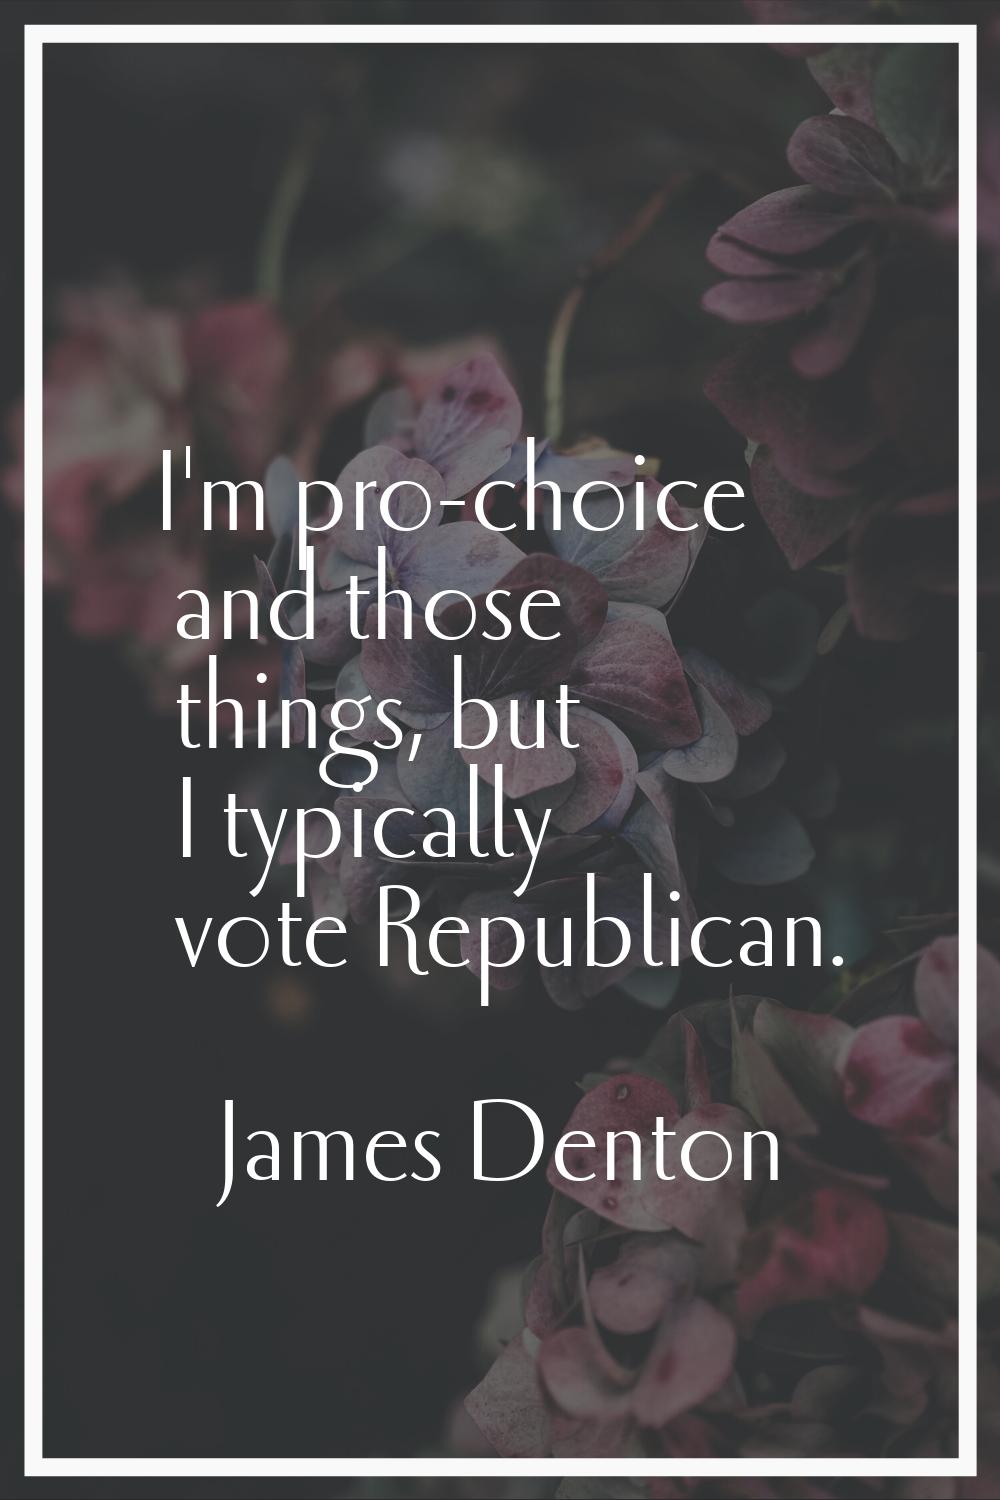 I'm pro-choice and those things, but I typically vote Republican.